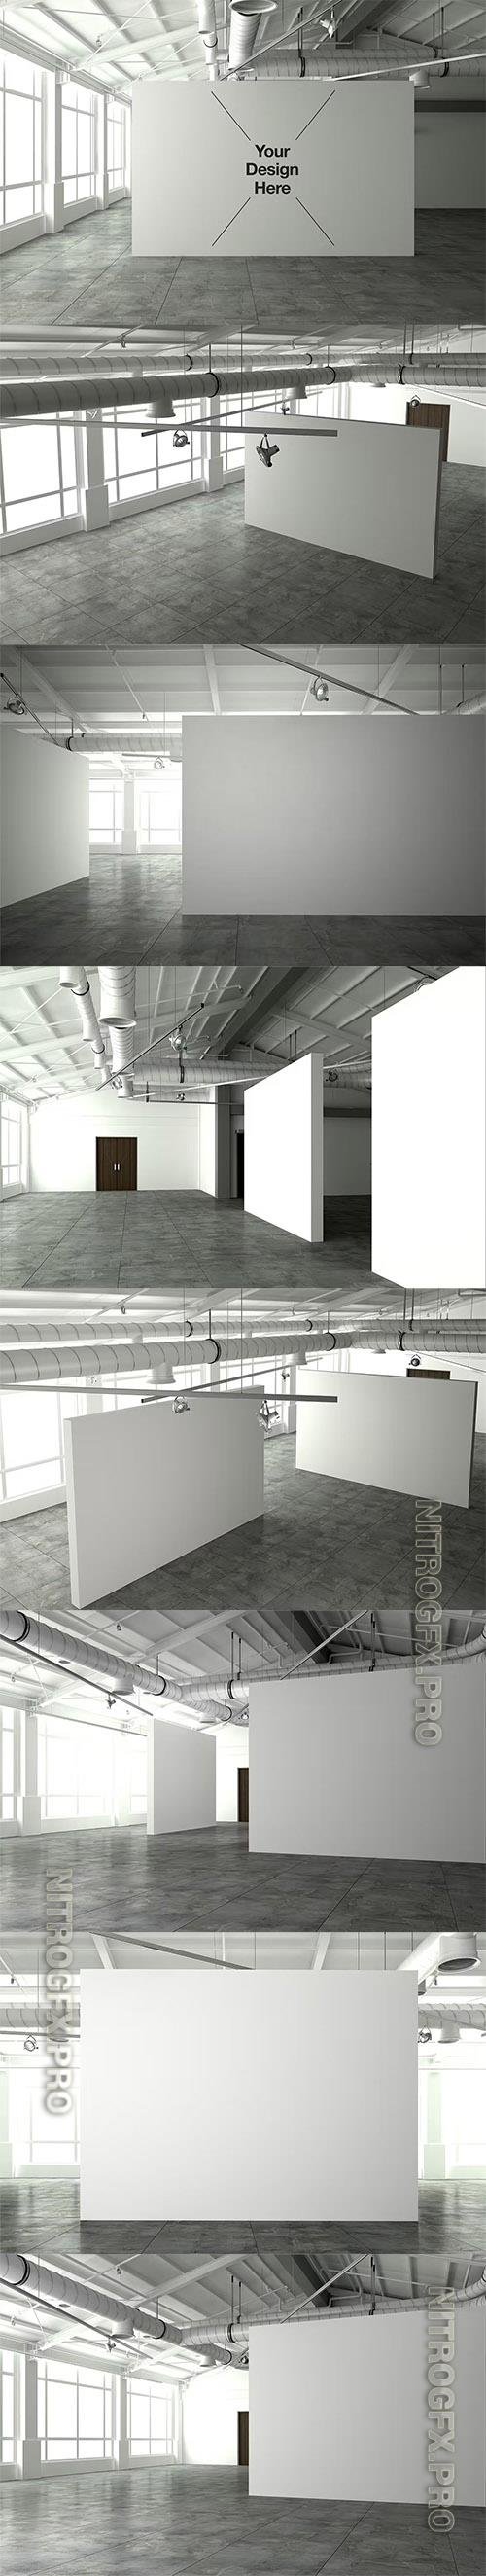 Gallery / Wall Graphic Mockup